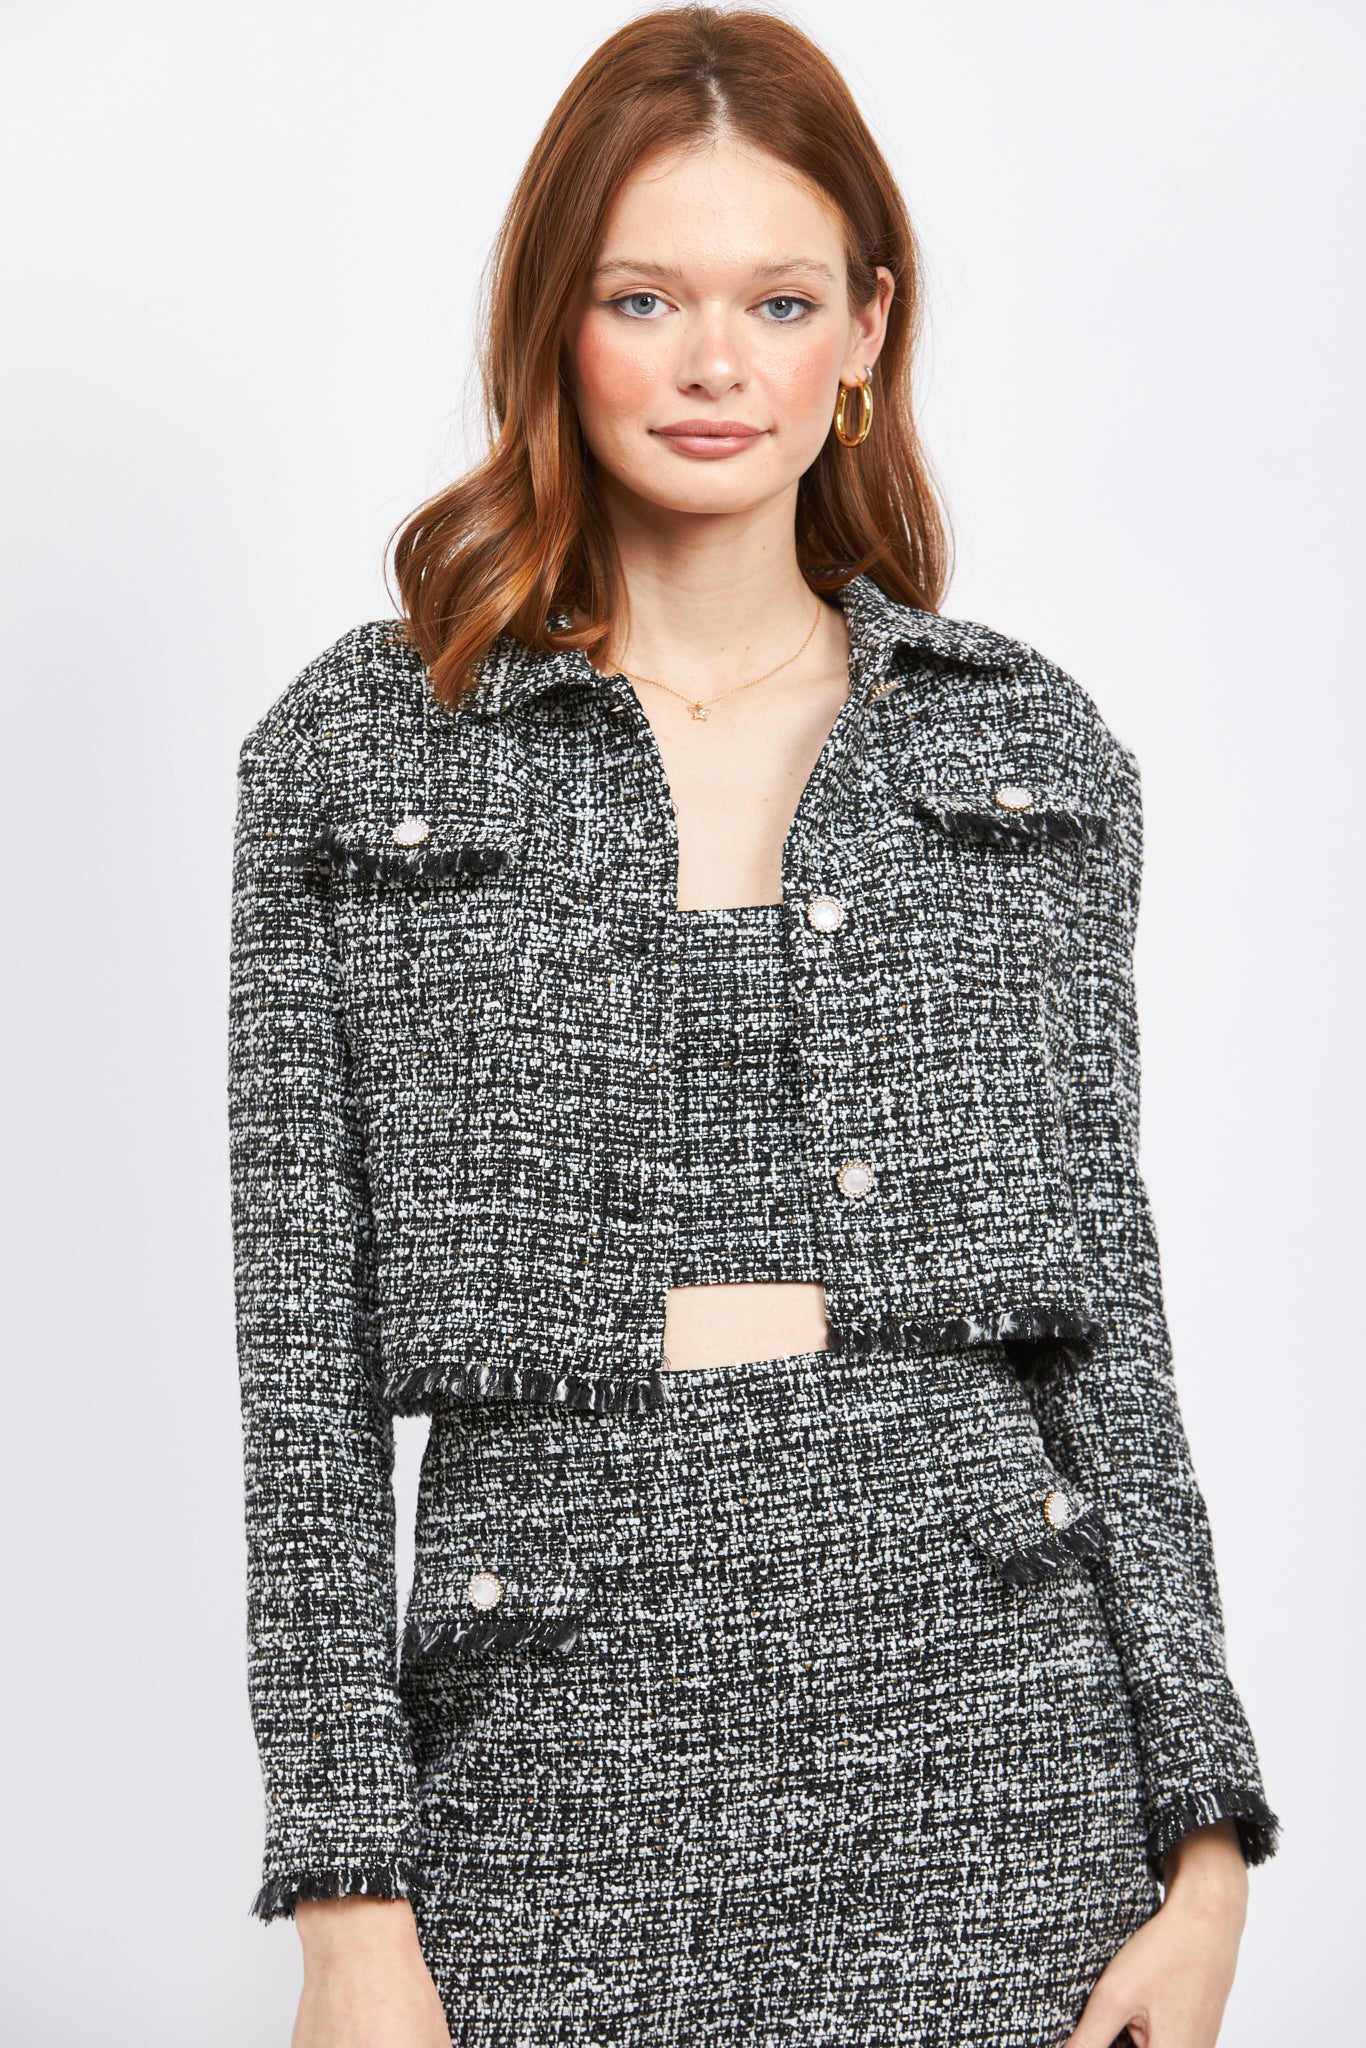 Chanel Blue Tweed Pearl Embellished Button Front Jacket M Chanel